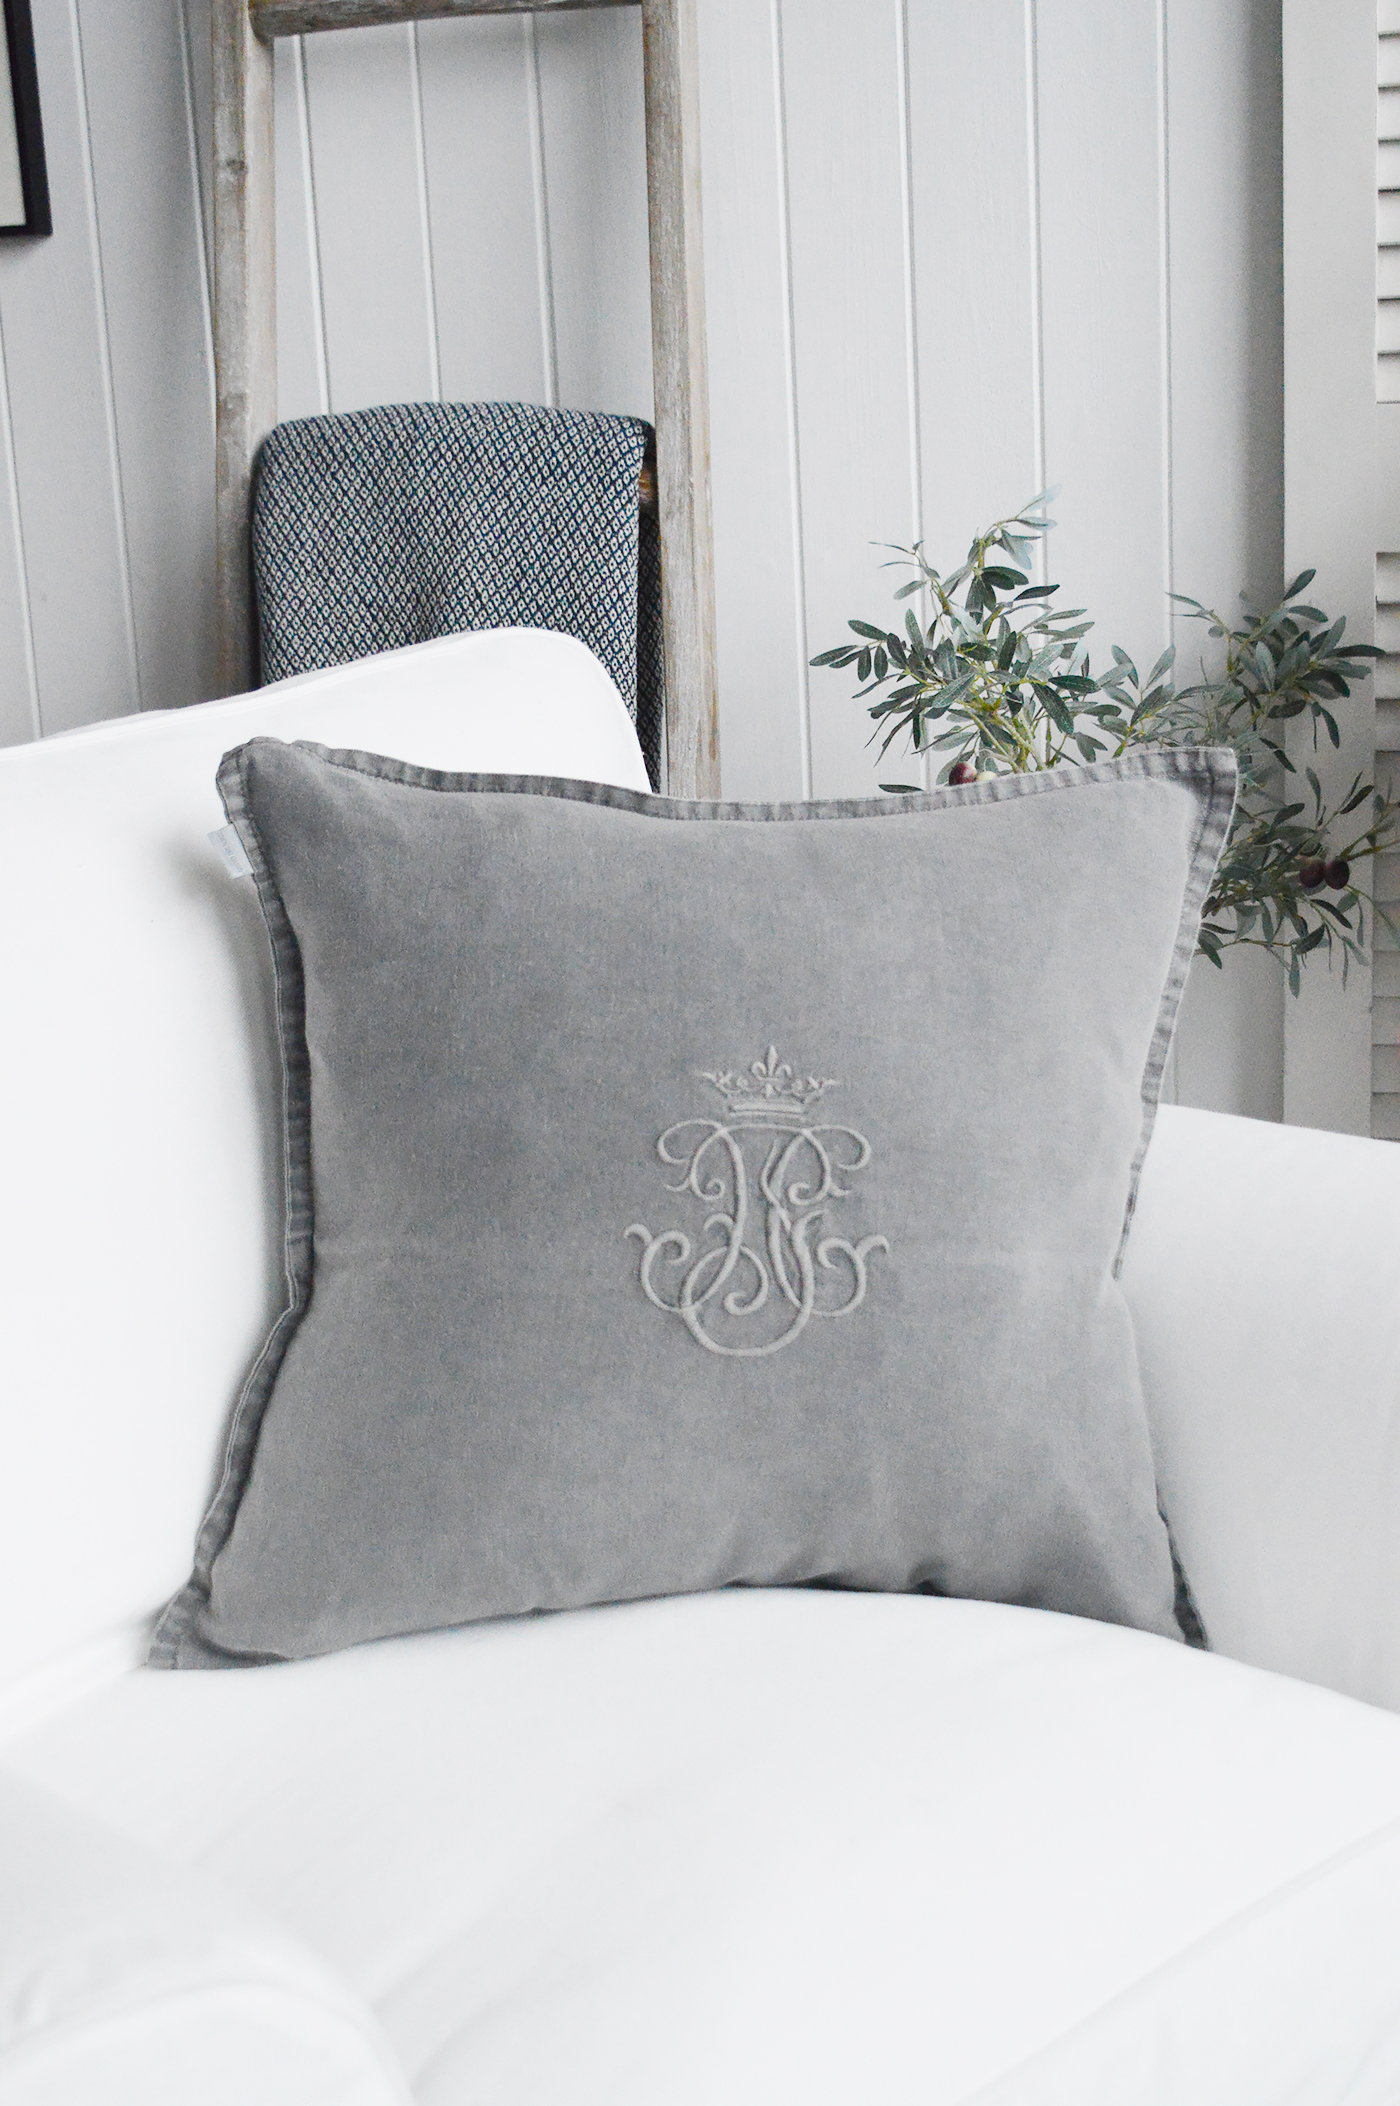 Grey linen Monogram cushion with feather inner for luxurious New England styled interiors. Hamptons, Coasyla, country and modern farmhouse furniture and home interiors